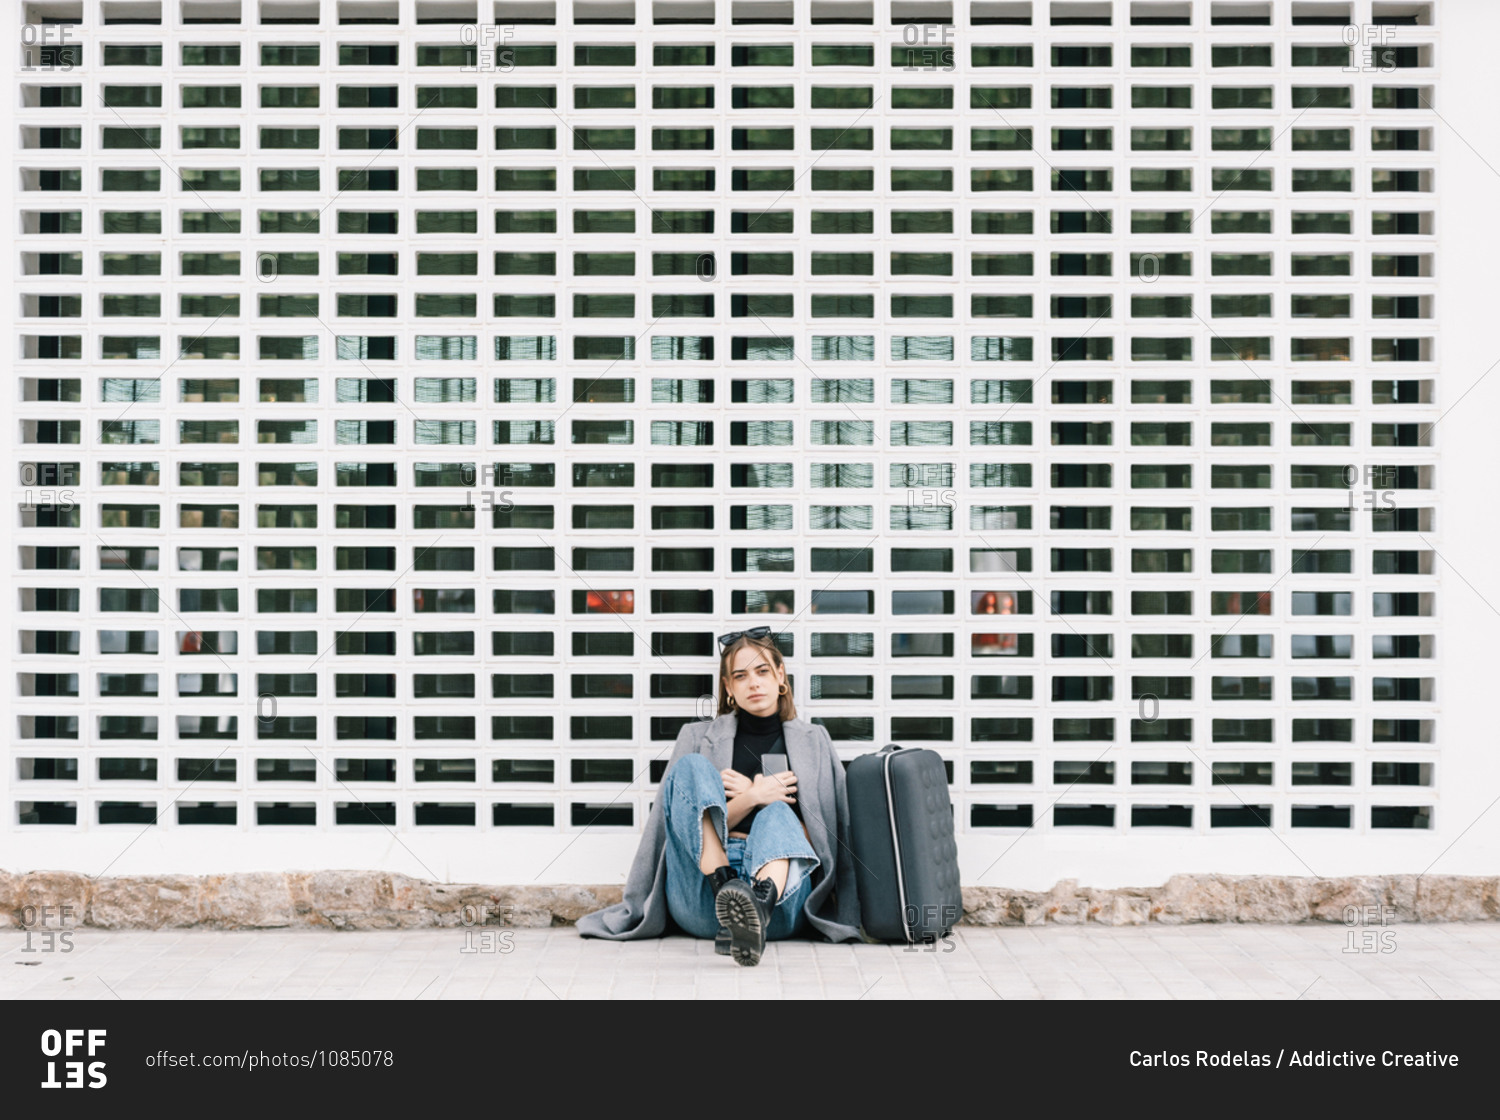 Female tourist with luggage sitting alone on pavement while getting lost in city looking at camera